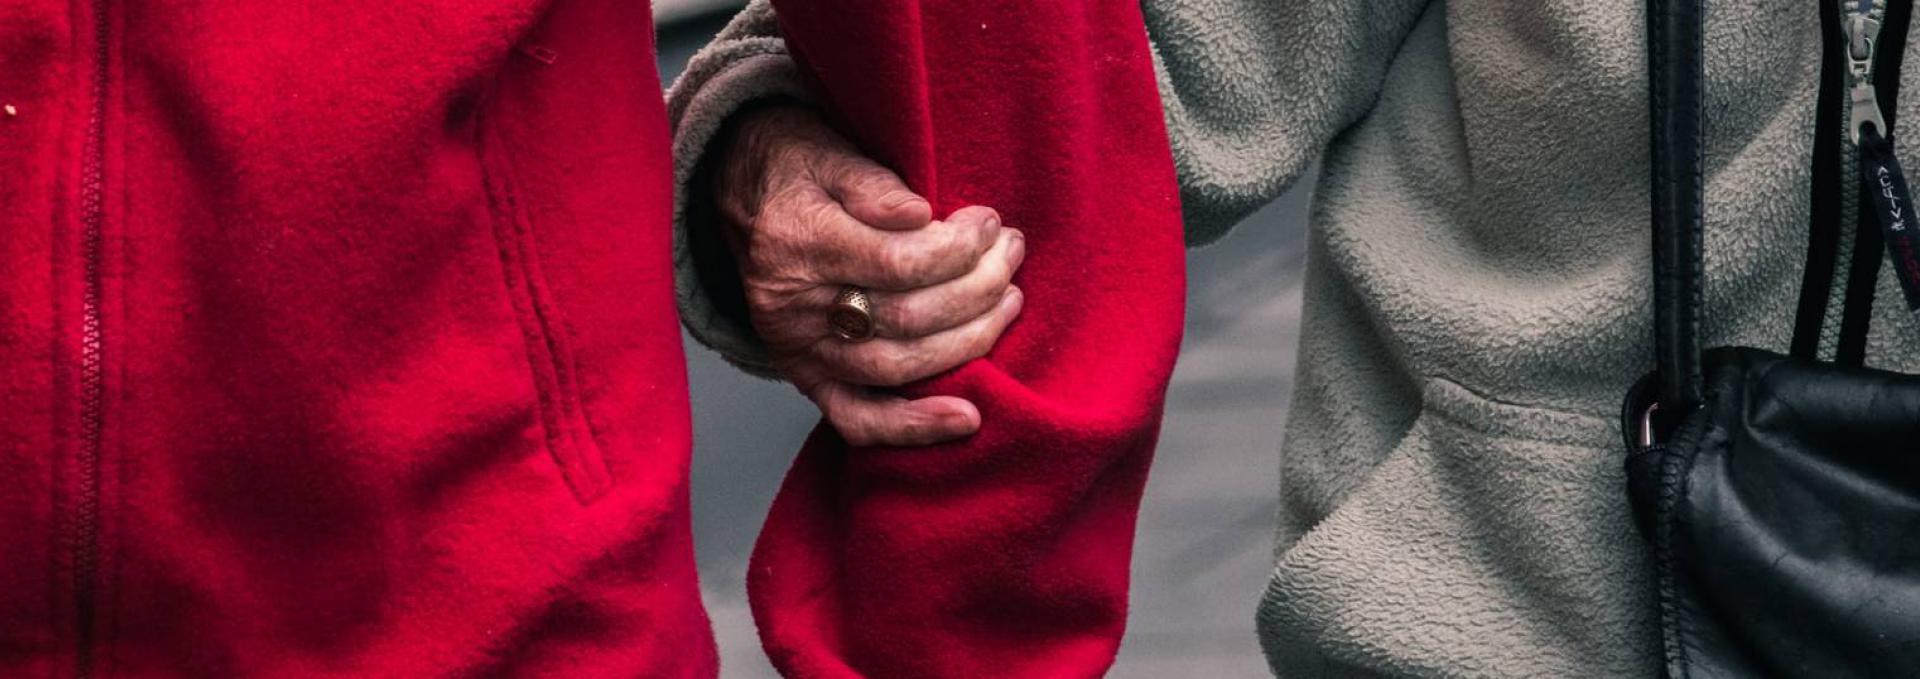 hand holding onto elbow in red jacket